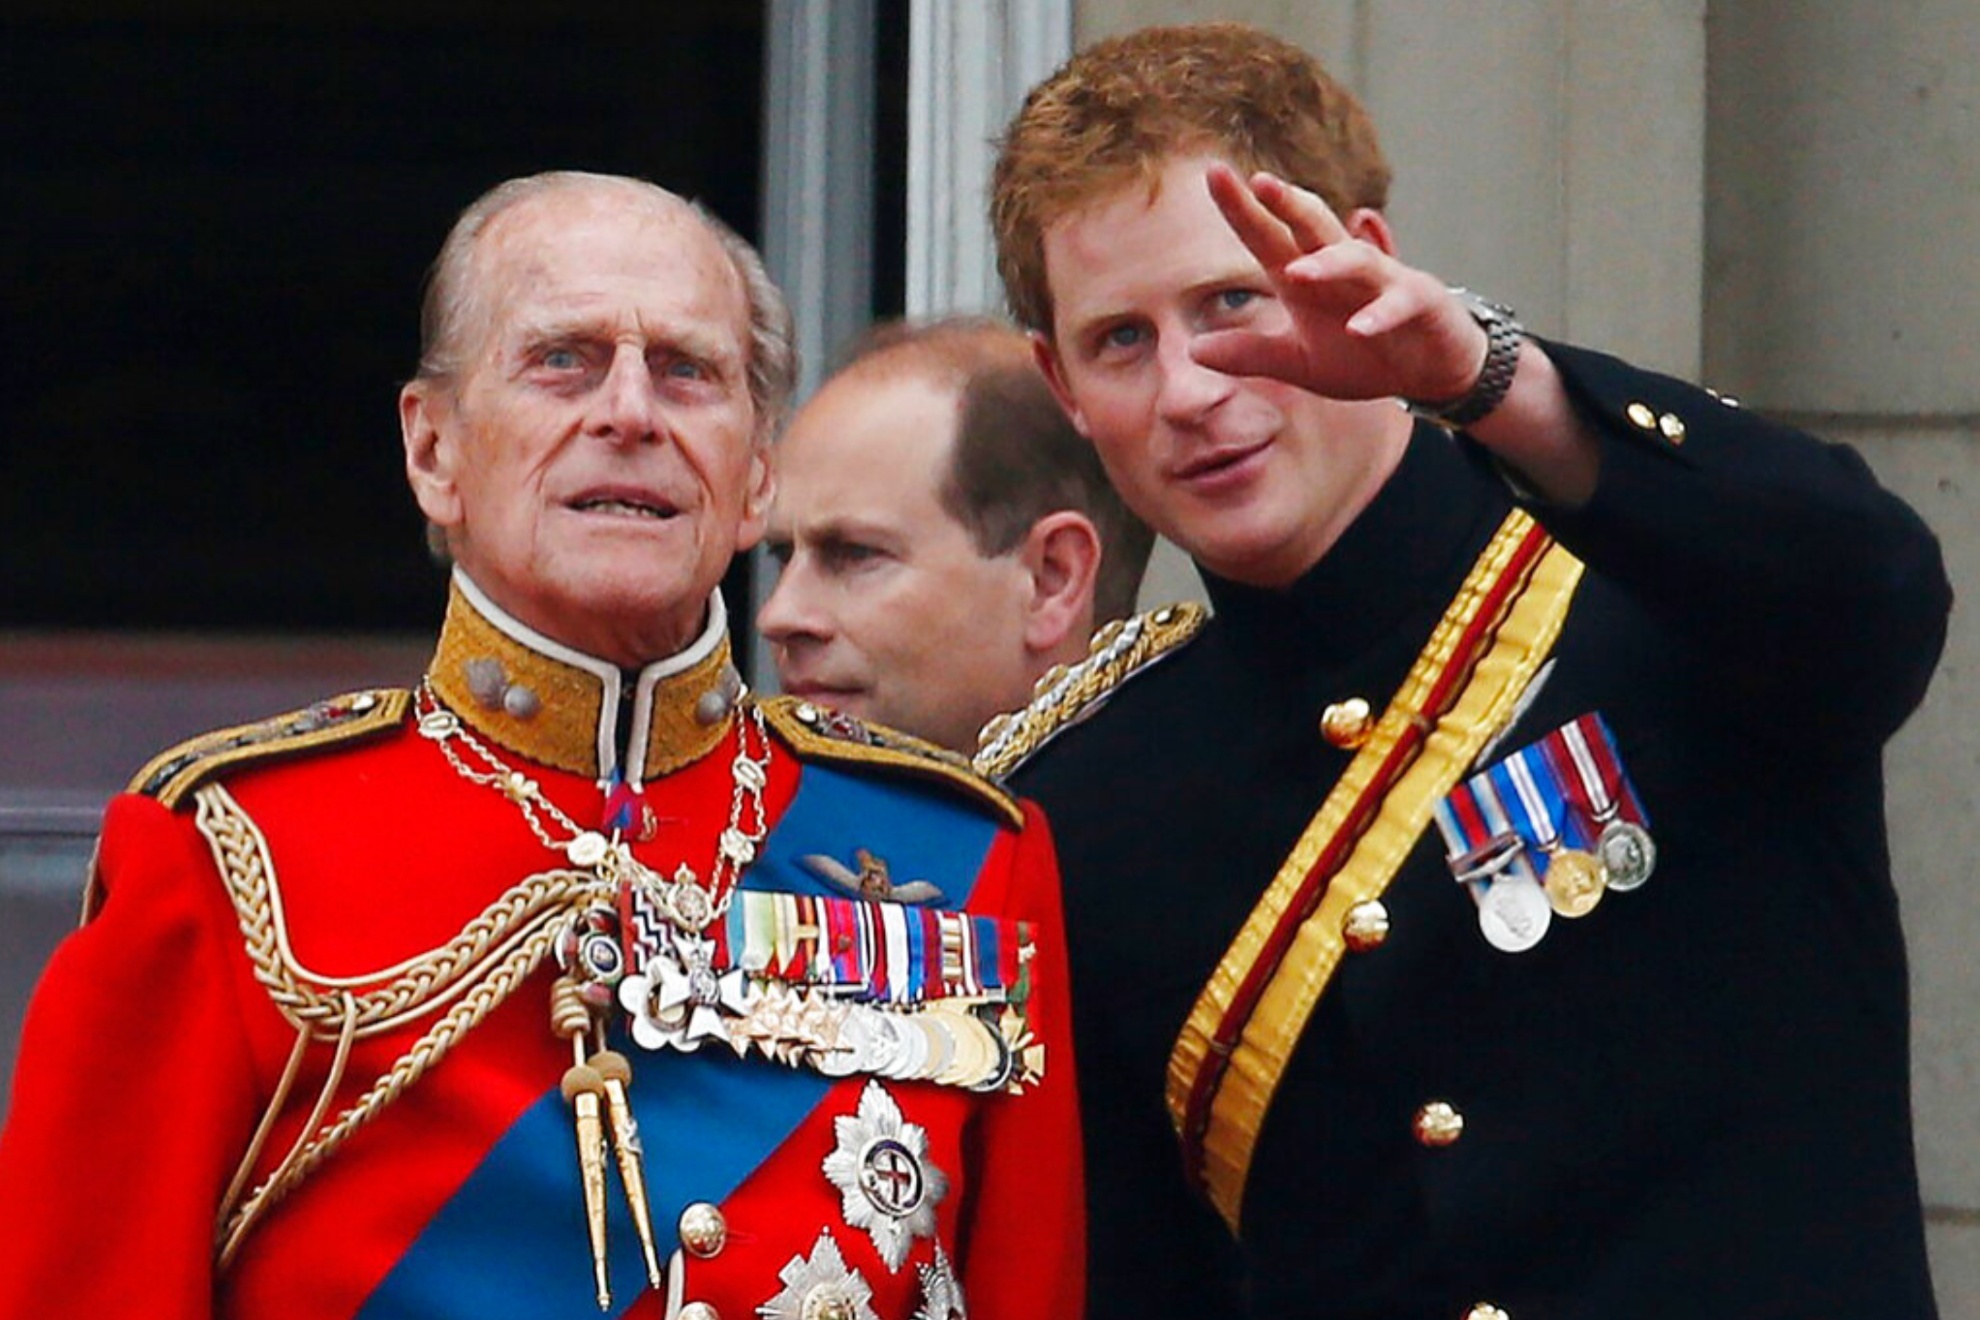 Prince Harry talks to Prince Philip as members of the Royal family  on the balcony of Buckingham Palace